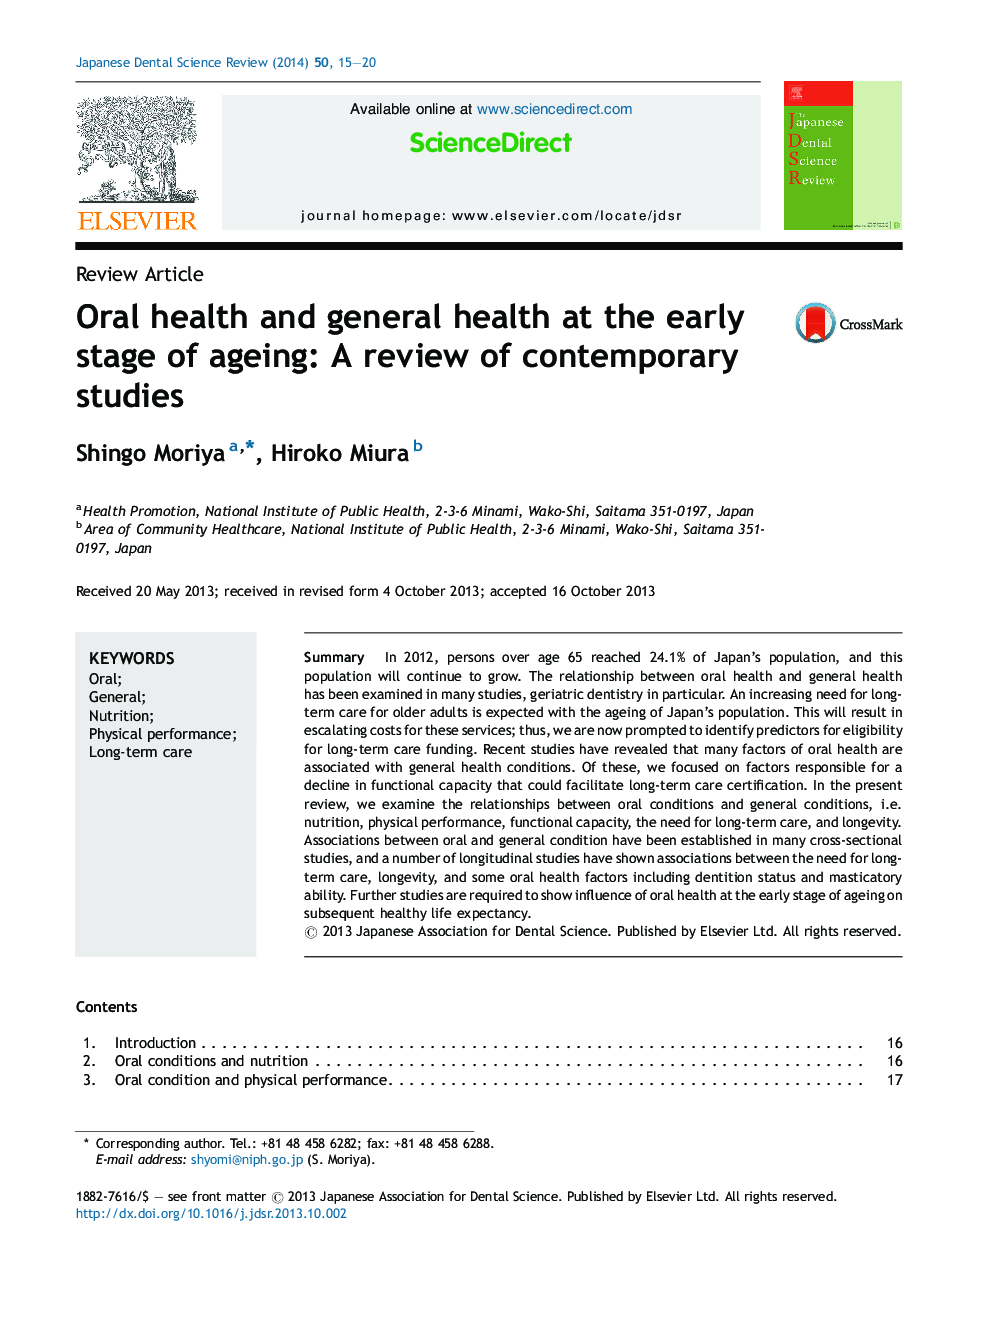 Oral health and general health at the early stage of ageing: A review of contemporary studies